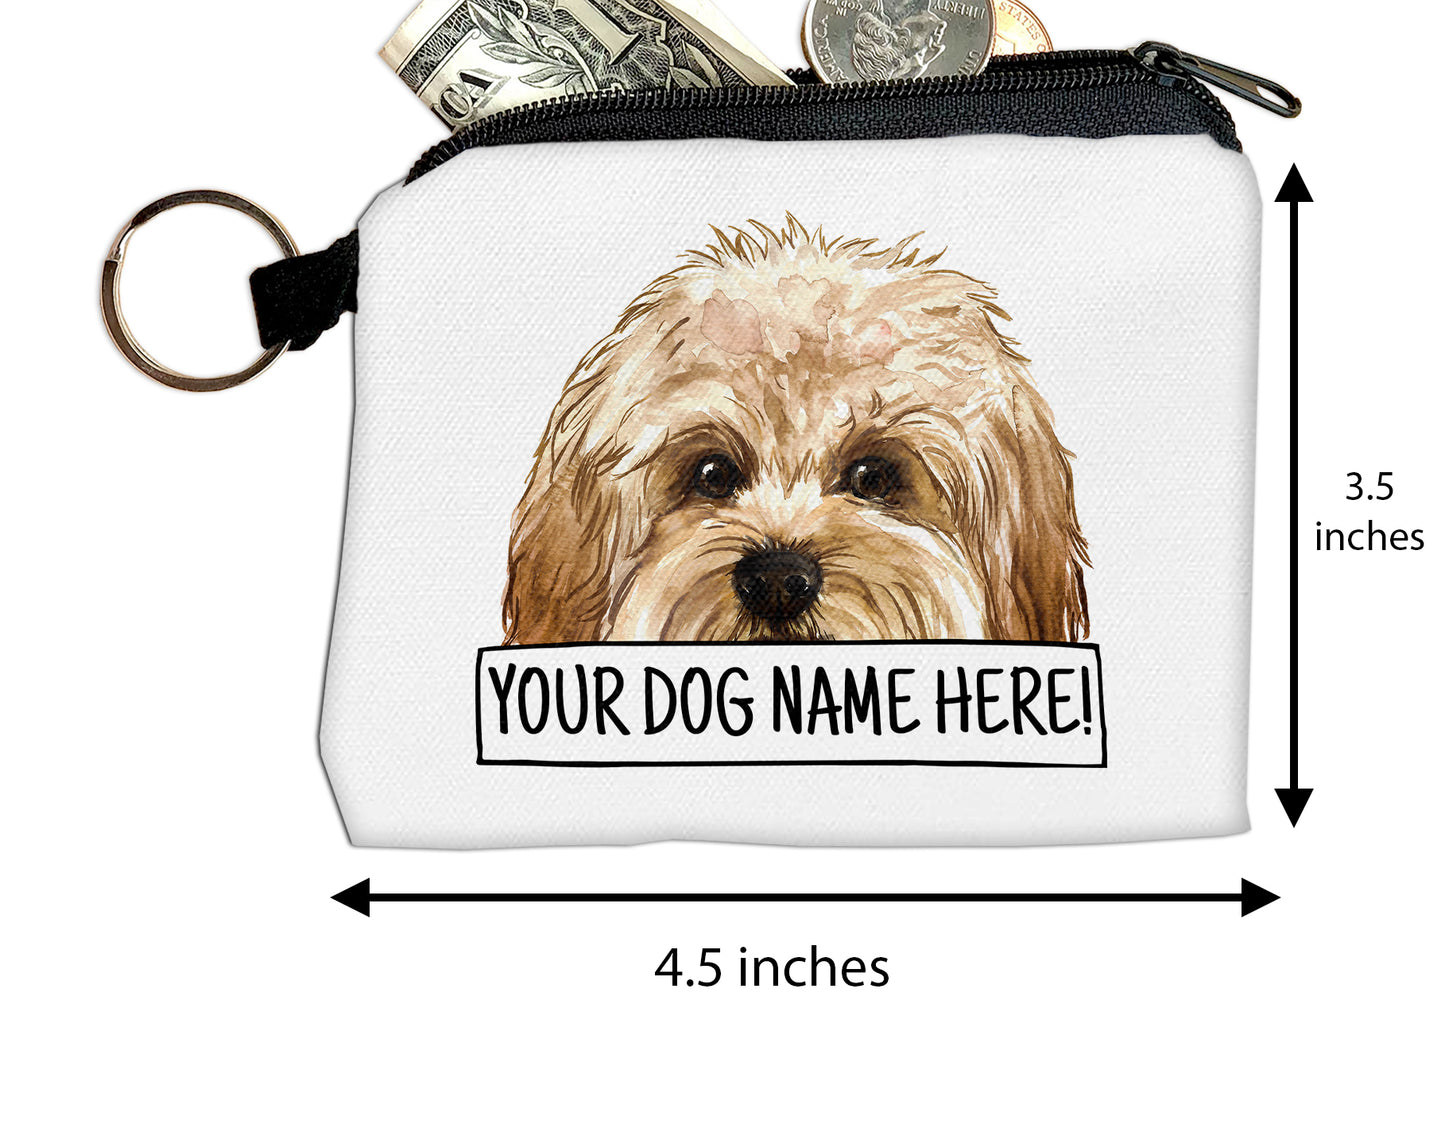 Add Your Dog Portrait and Name - Zipper Coin Purse